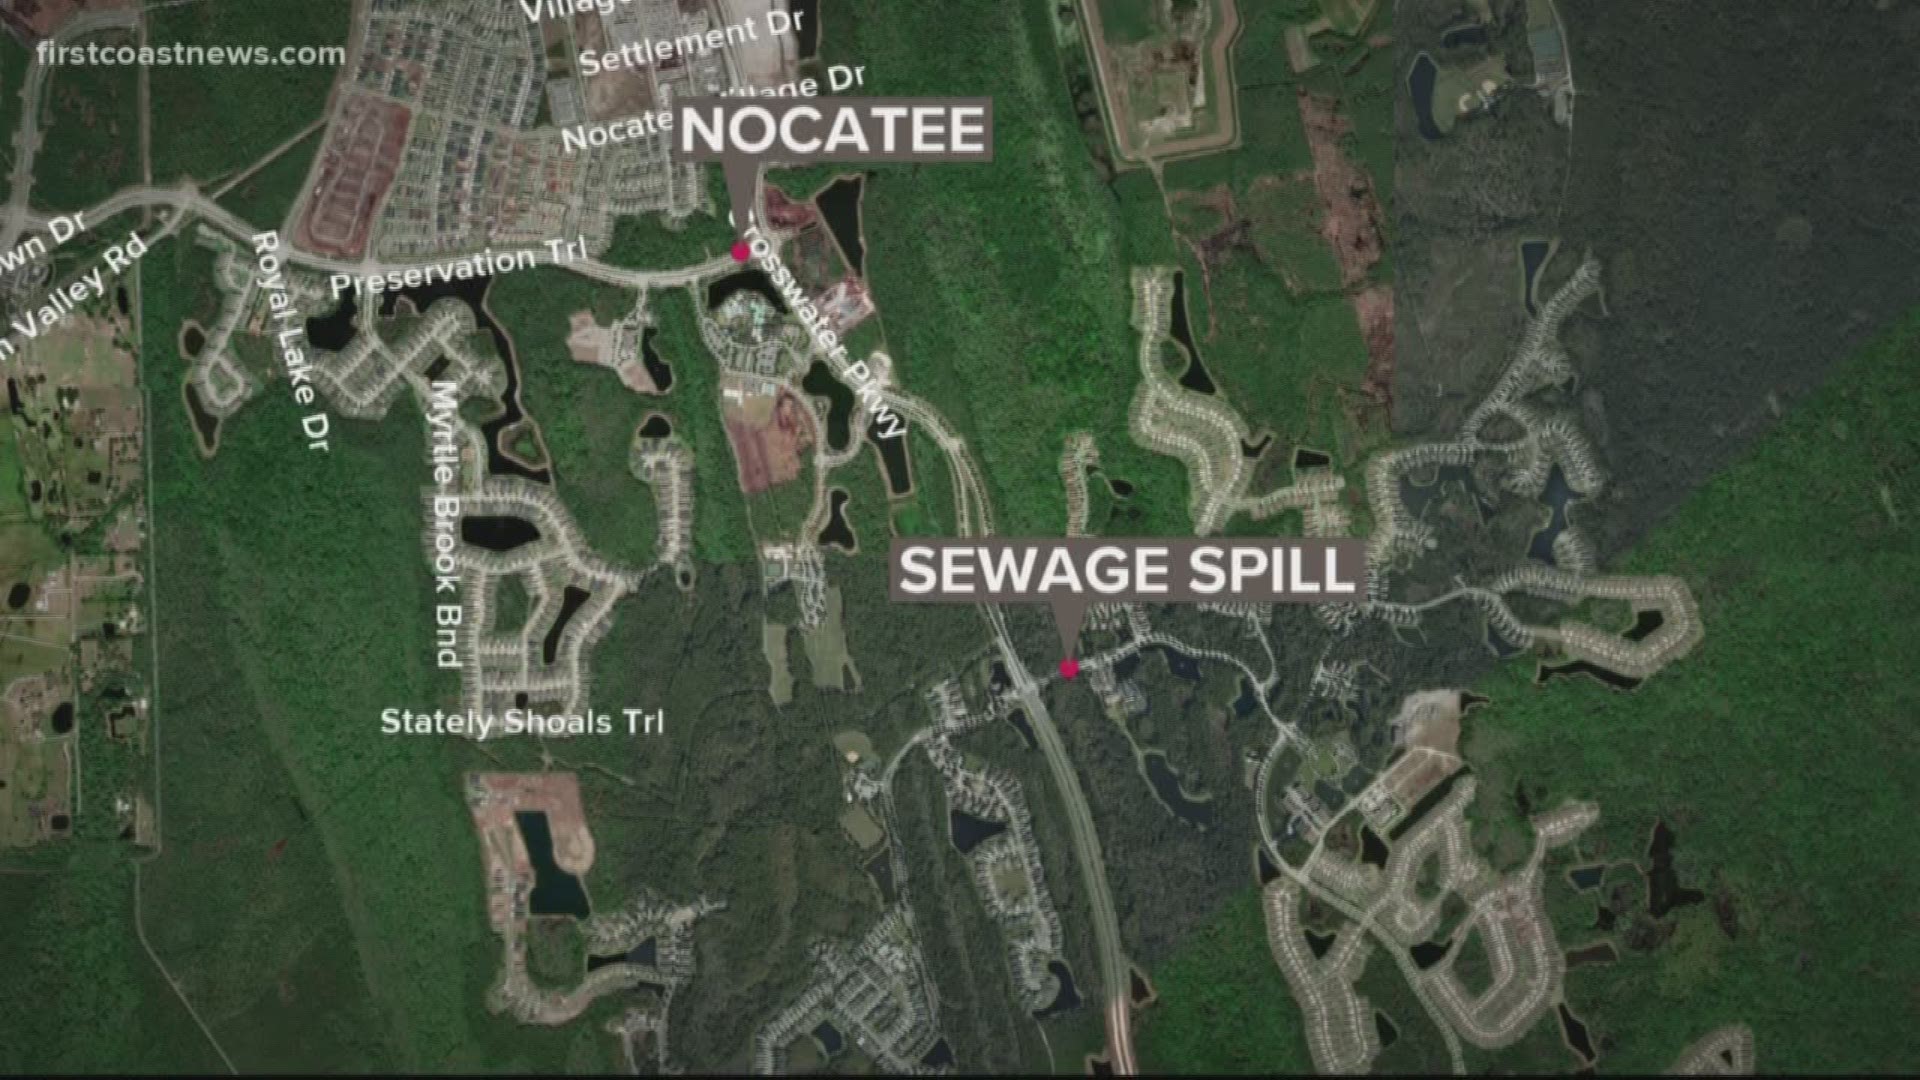 The DEP says that on Wednesday a main failed and released an estimated 100,452 gallons of sewer onto the ground, onto the road, and into a stormwater system at Del Webb Parkway and Bay Breeze Drive.